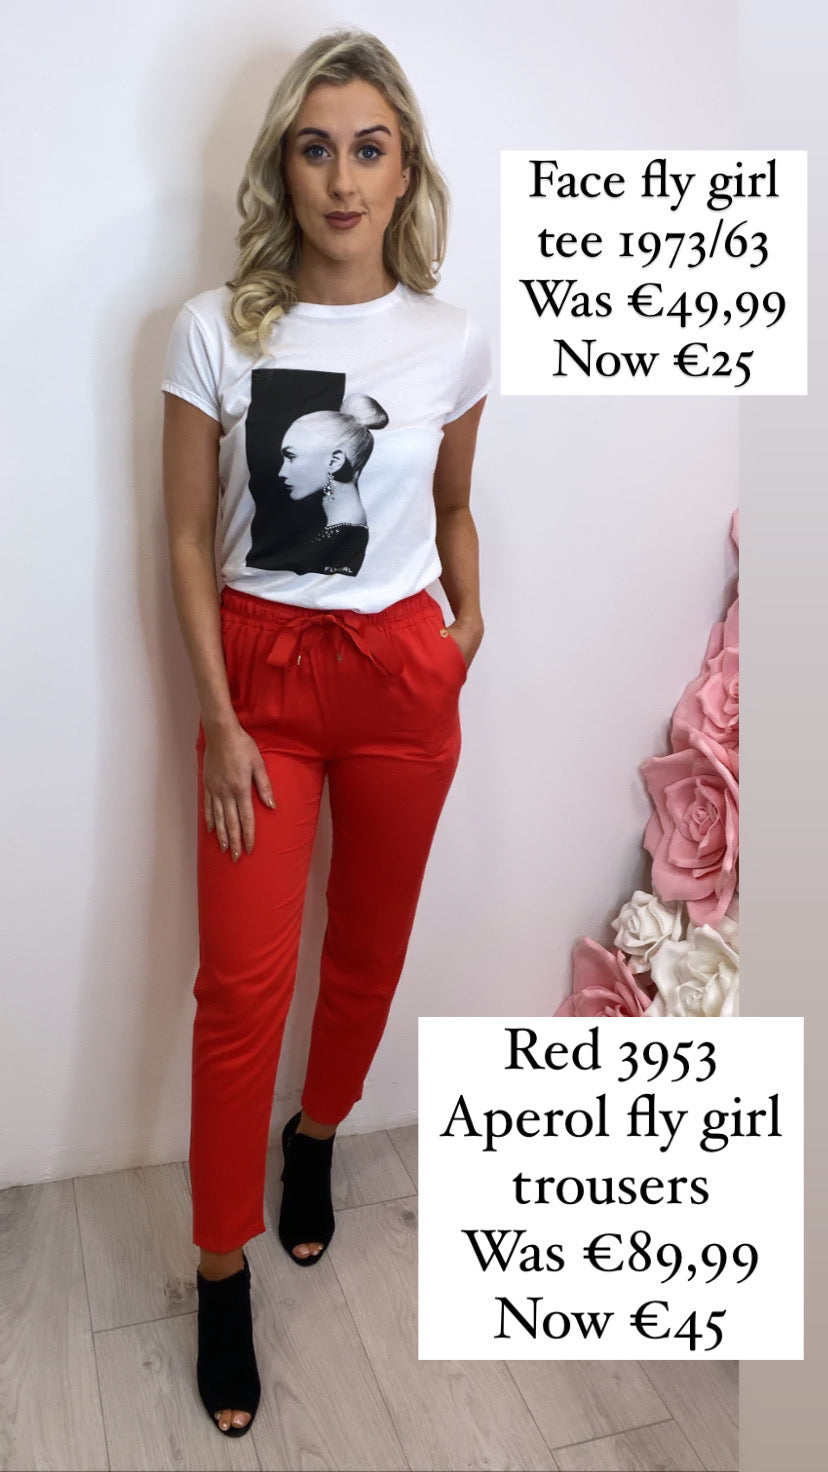 Red 3953 sale Aperol fly girl trousers